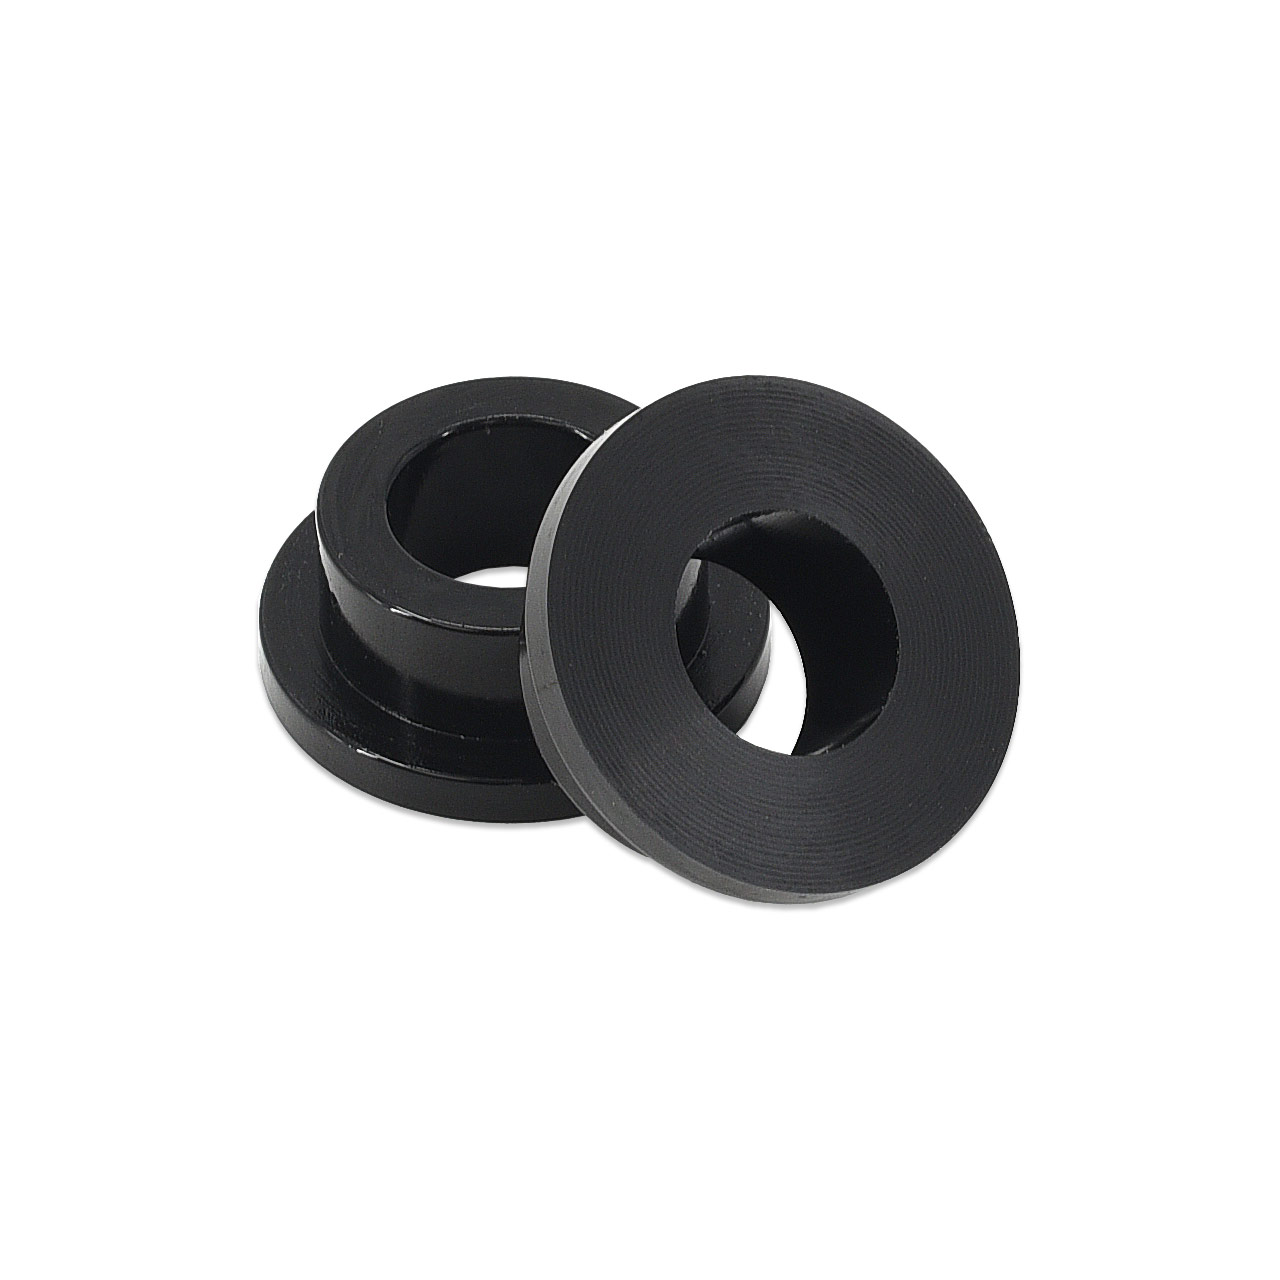 IAG Replacement Small Pitch Mount Bushing Kit